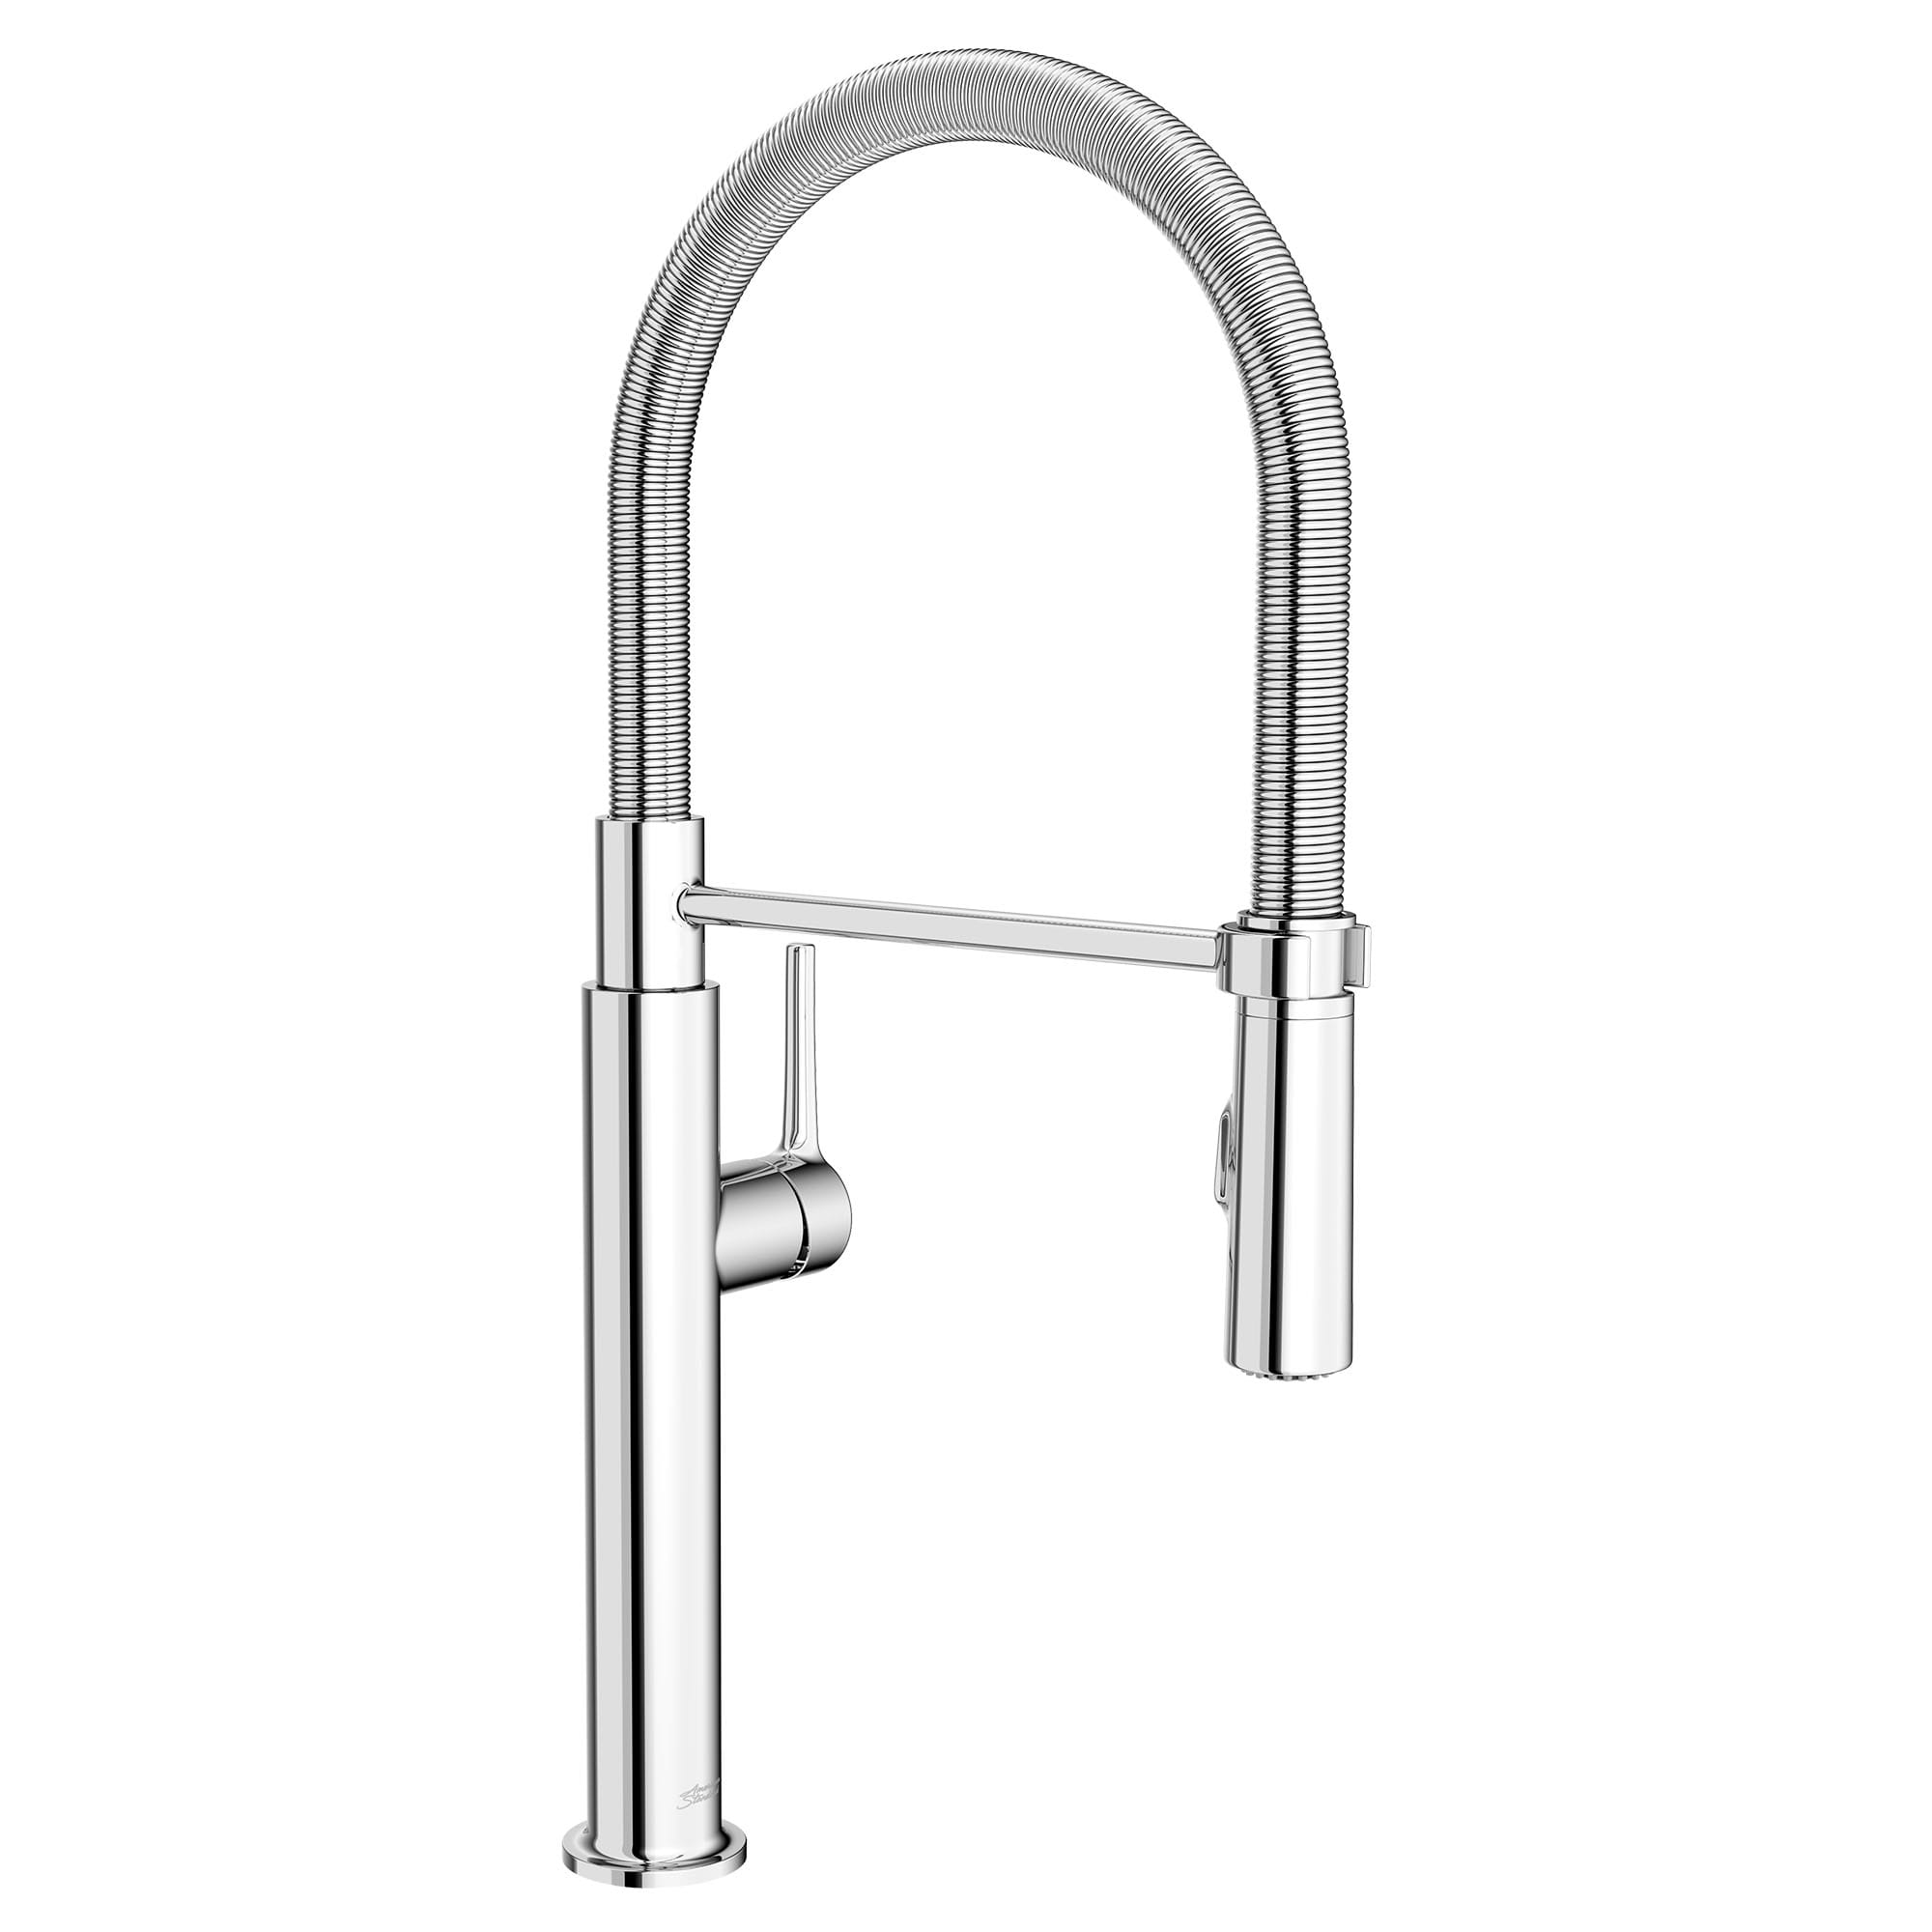 Studio® S Semi-Pro Pull-Down Dual Spray Kitchen Faucet With Spring Spout